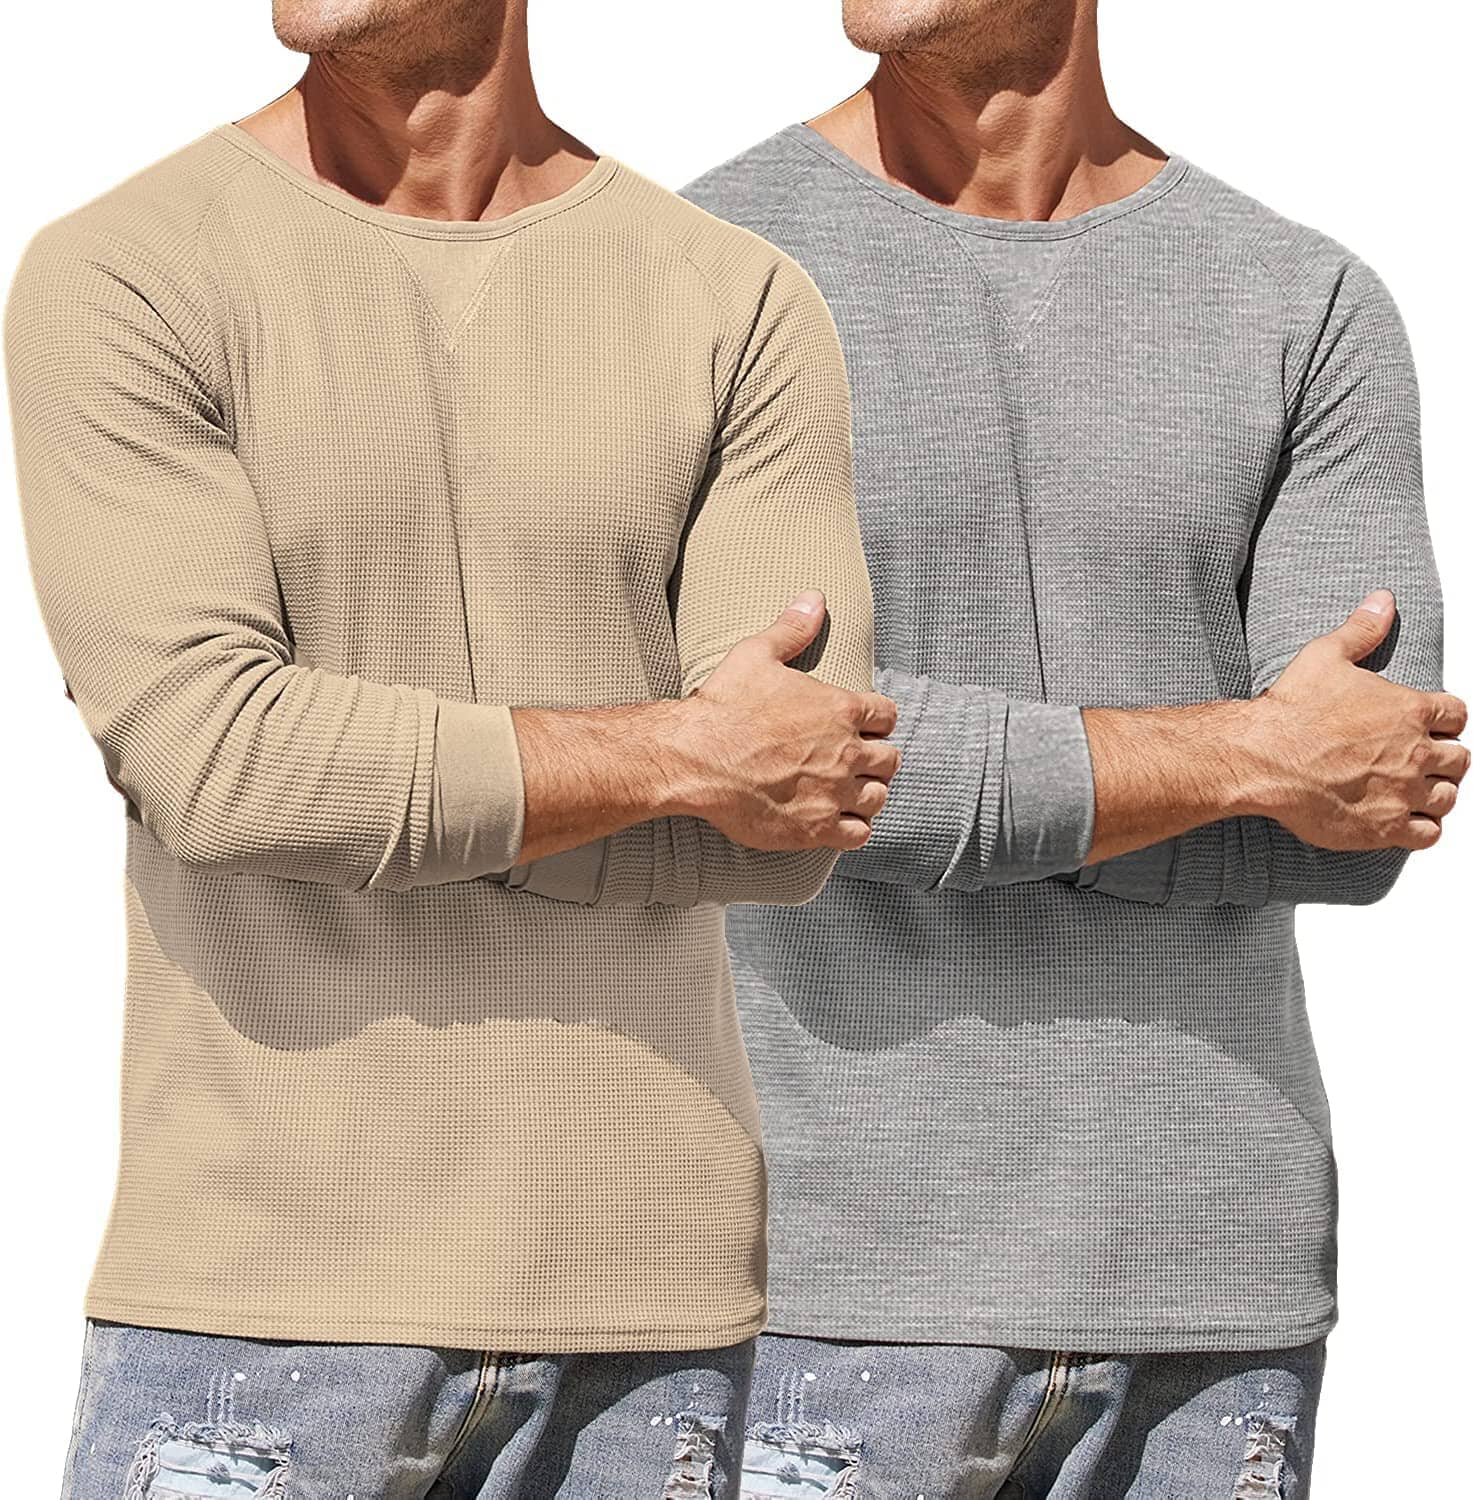 2 Pack Waffle Long Sleeve Cotton T-Shirt (US Only) T-Shirt COOFANDY Store Khaki/Grey S 